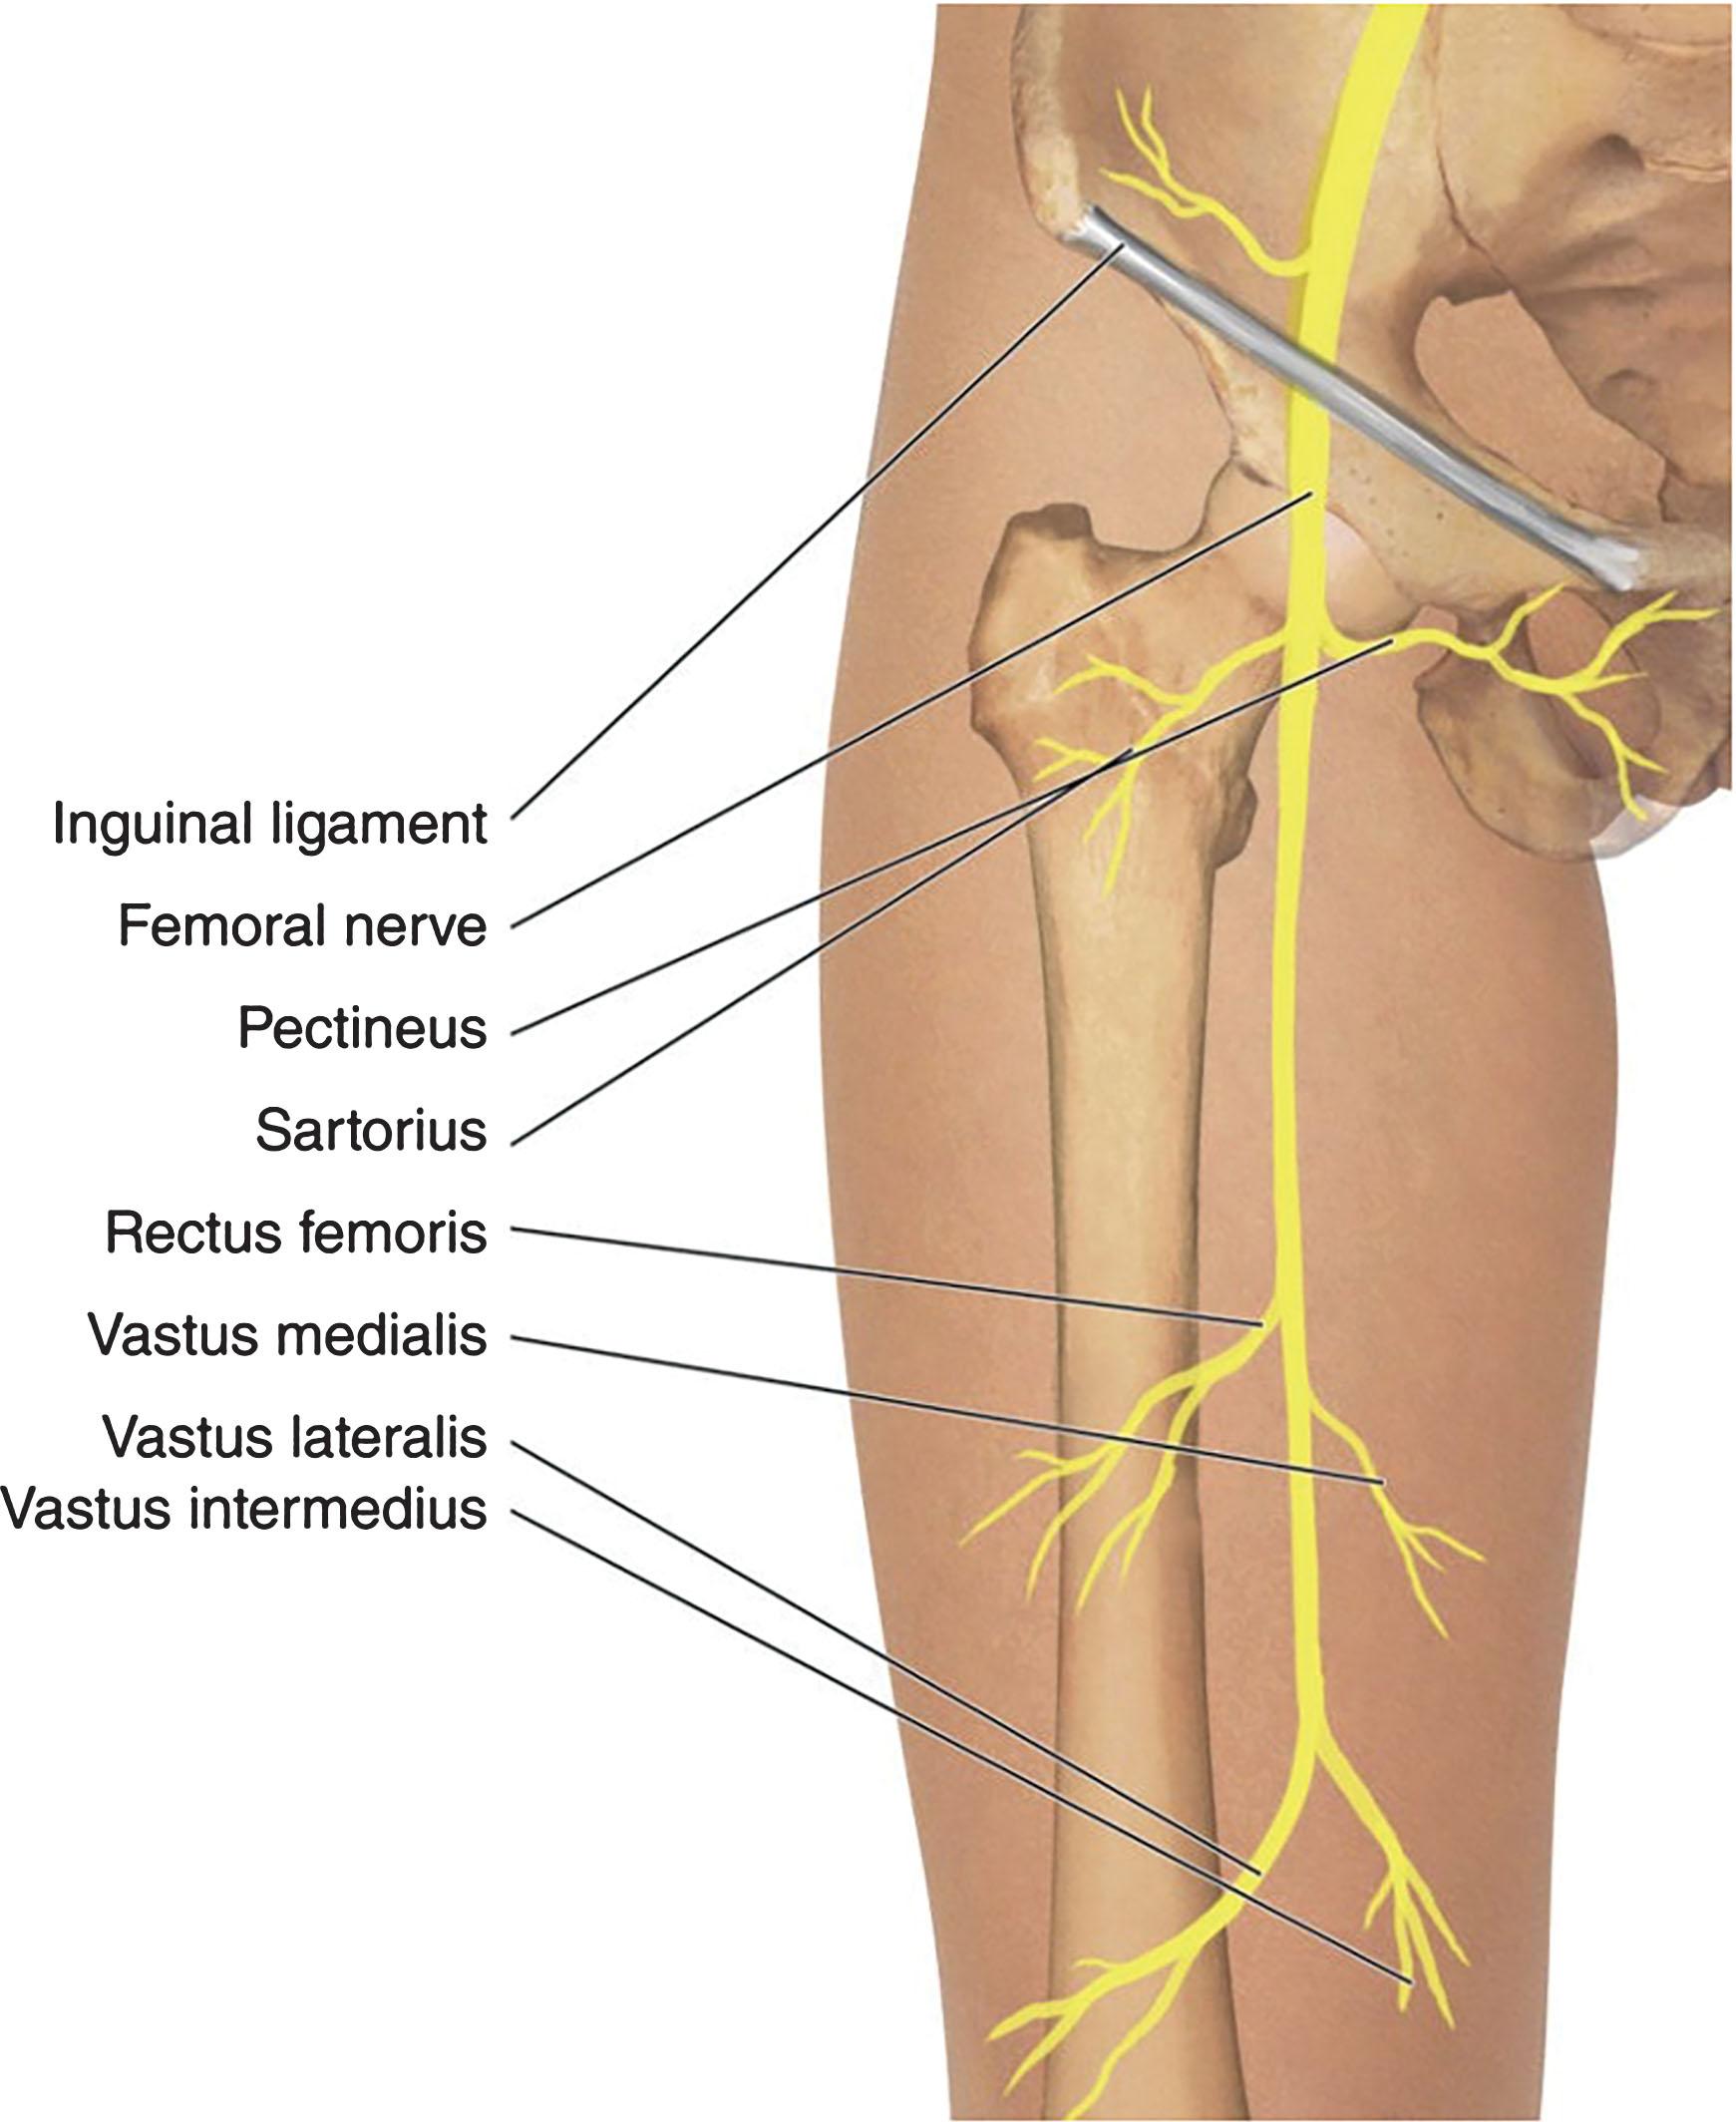 Figure 24.2, Motor branches of the femoral nerve.